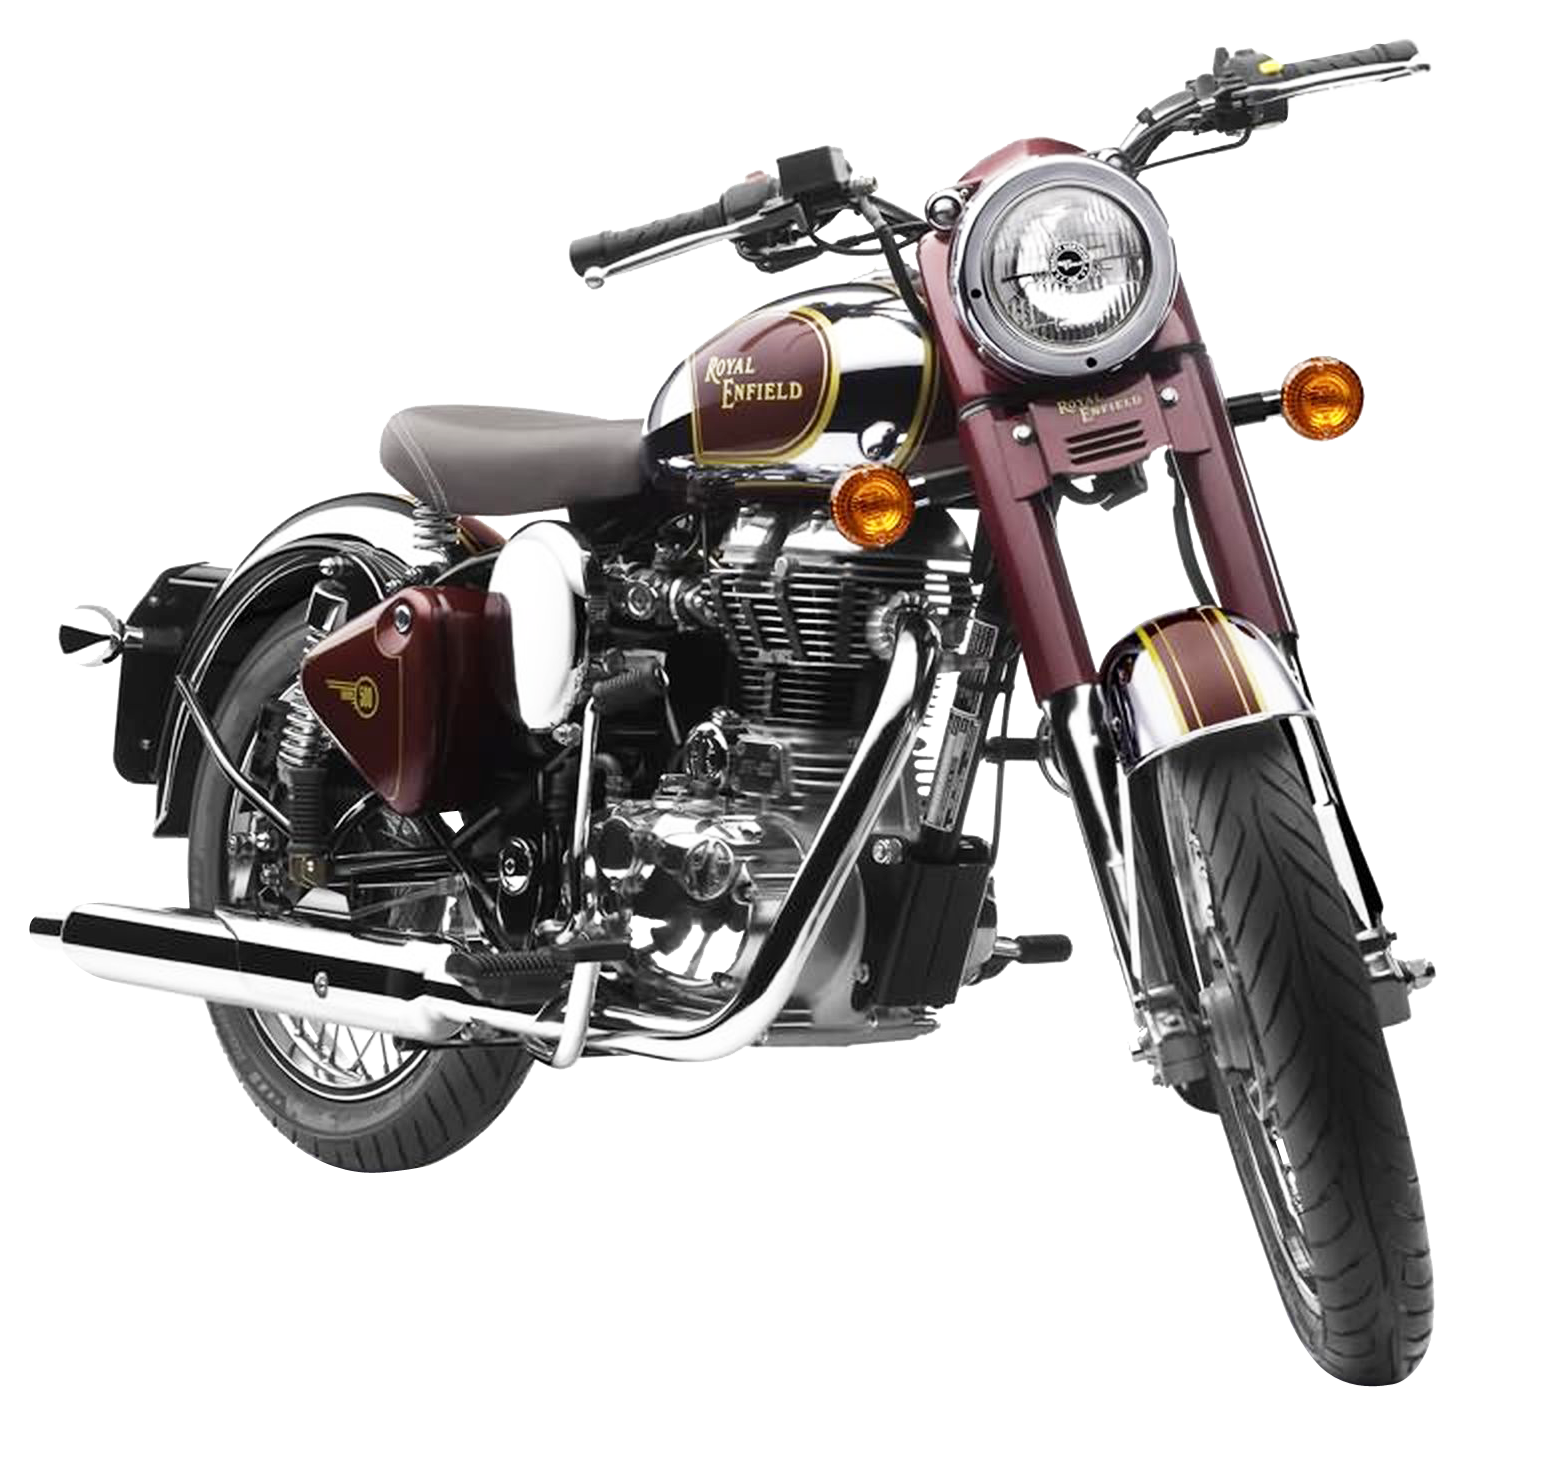 Royal Enfield Classic Motorcycle Bike Png Image Pngpix | My XXX Hot Girl